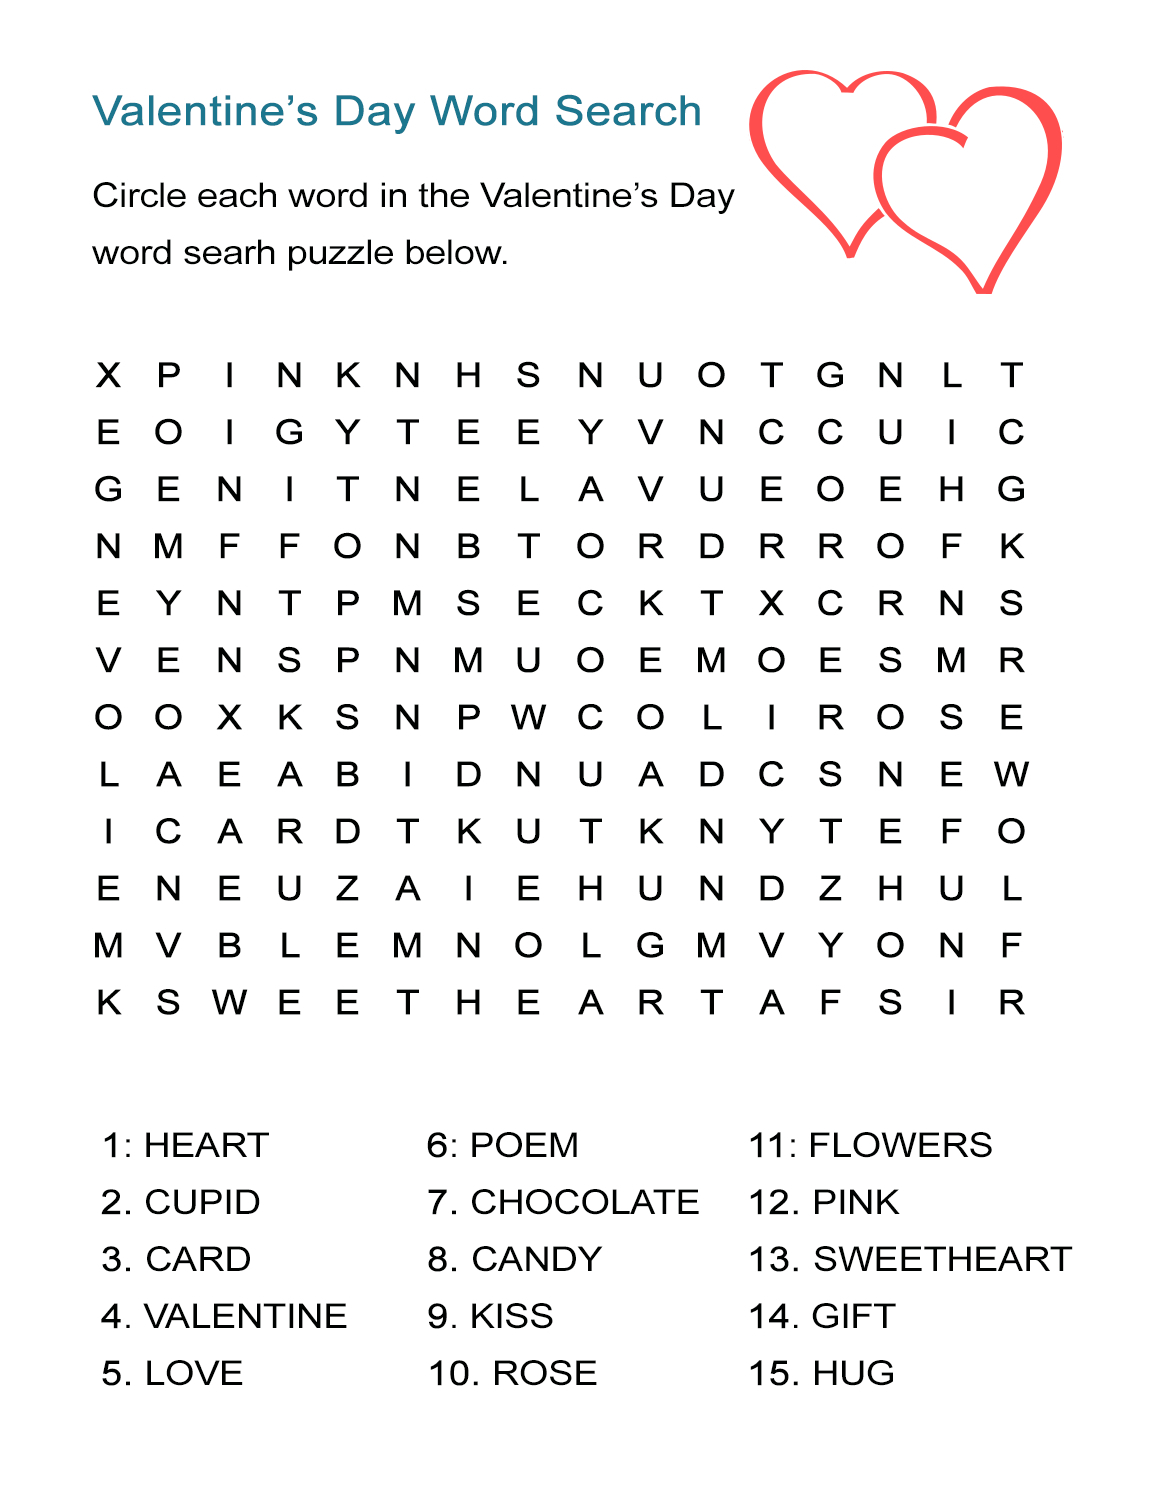 Valentine&amp;#039;s Day Word Search Puzzle: Free Worksheet For February 14 - Valentine&amp;#039;s Day Printable Puzzle